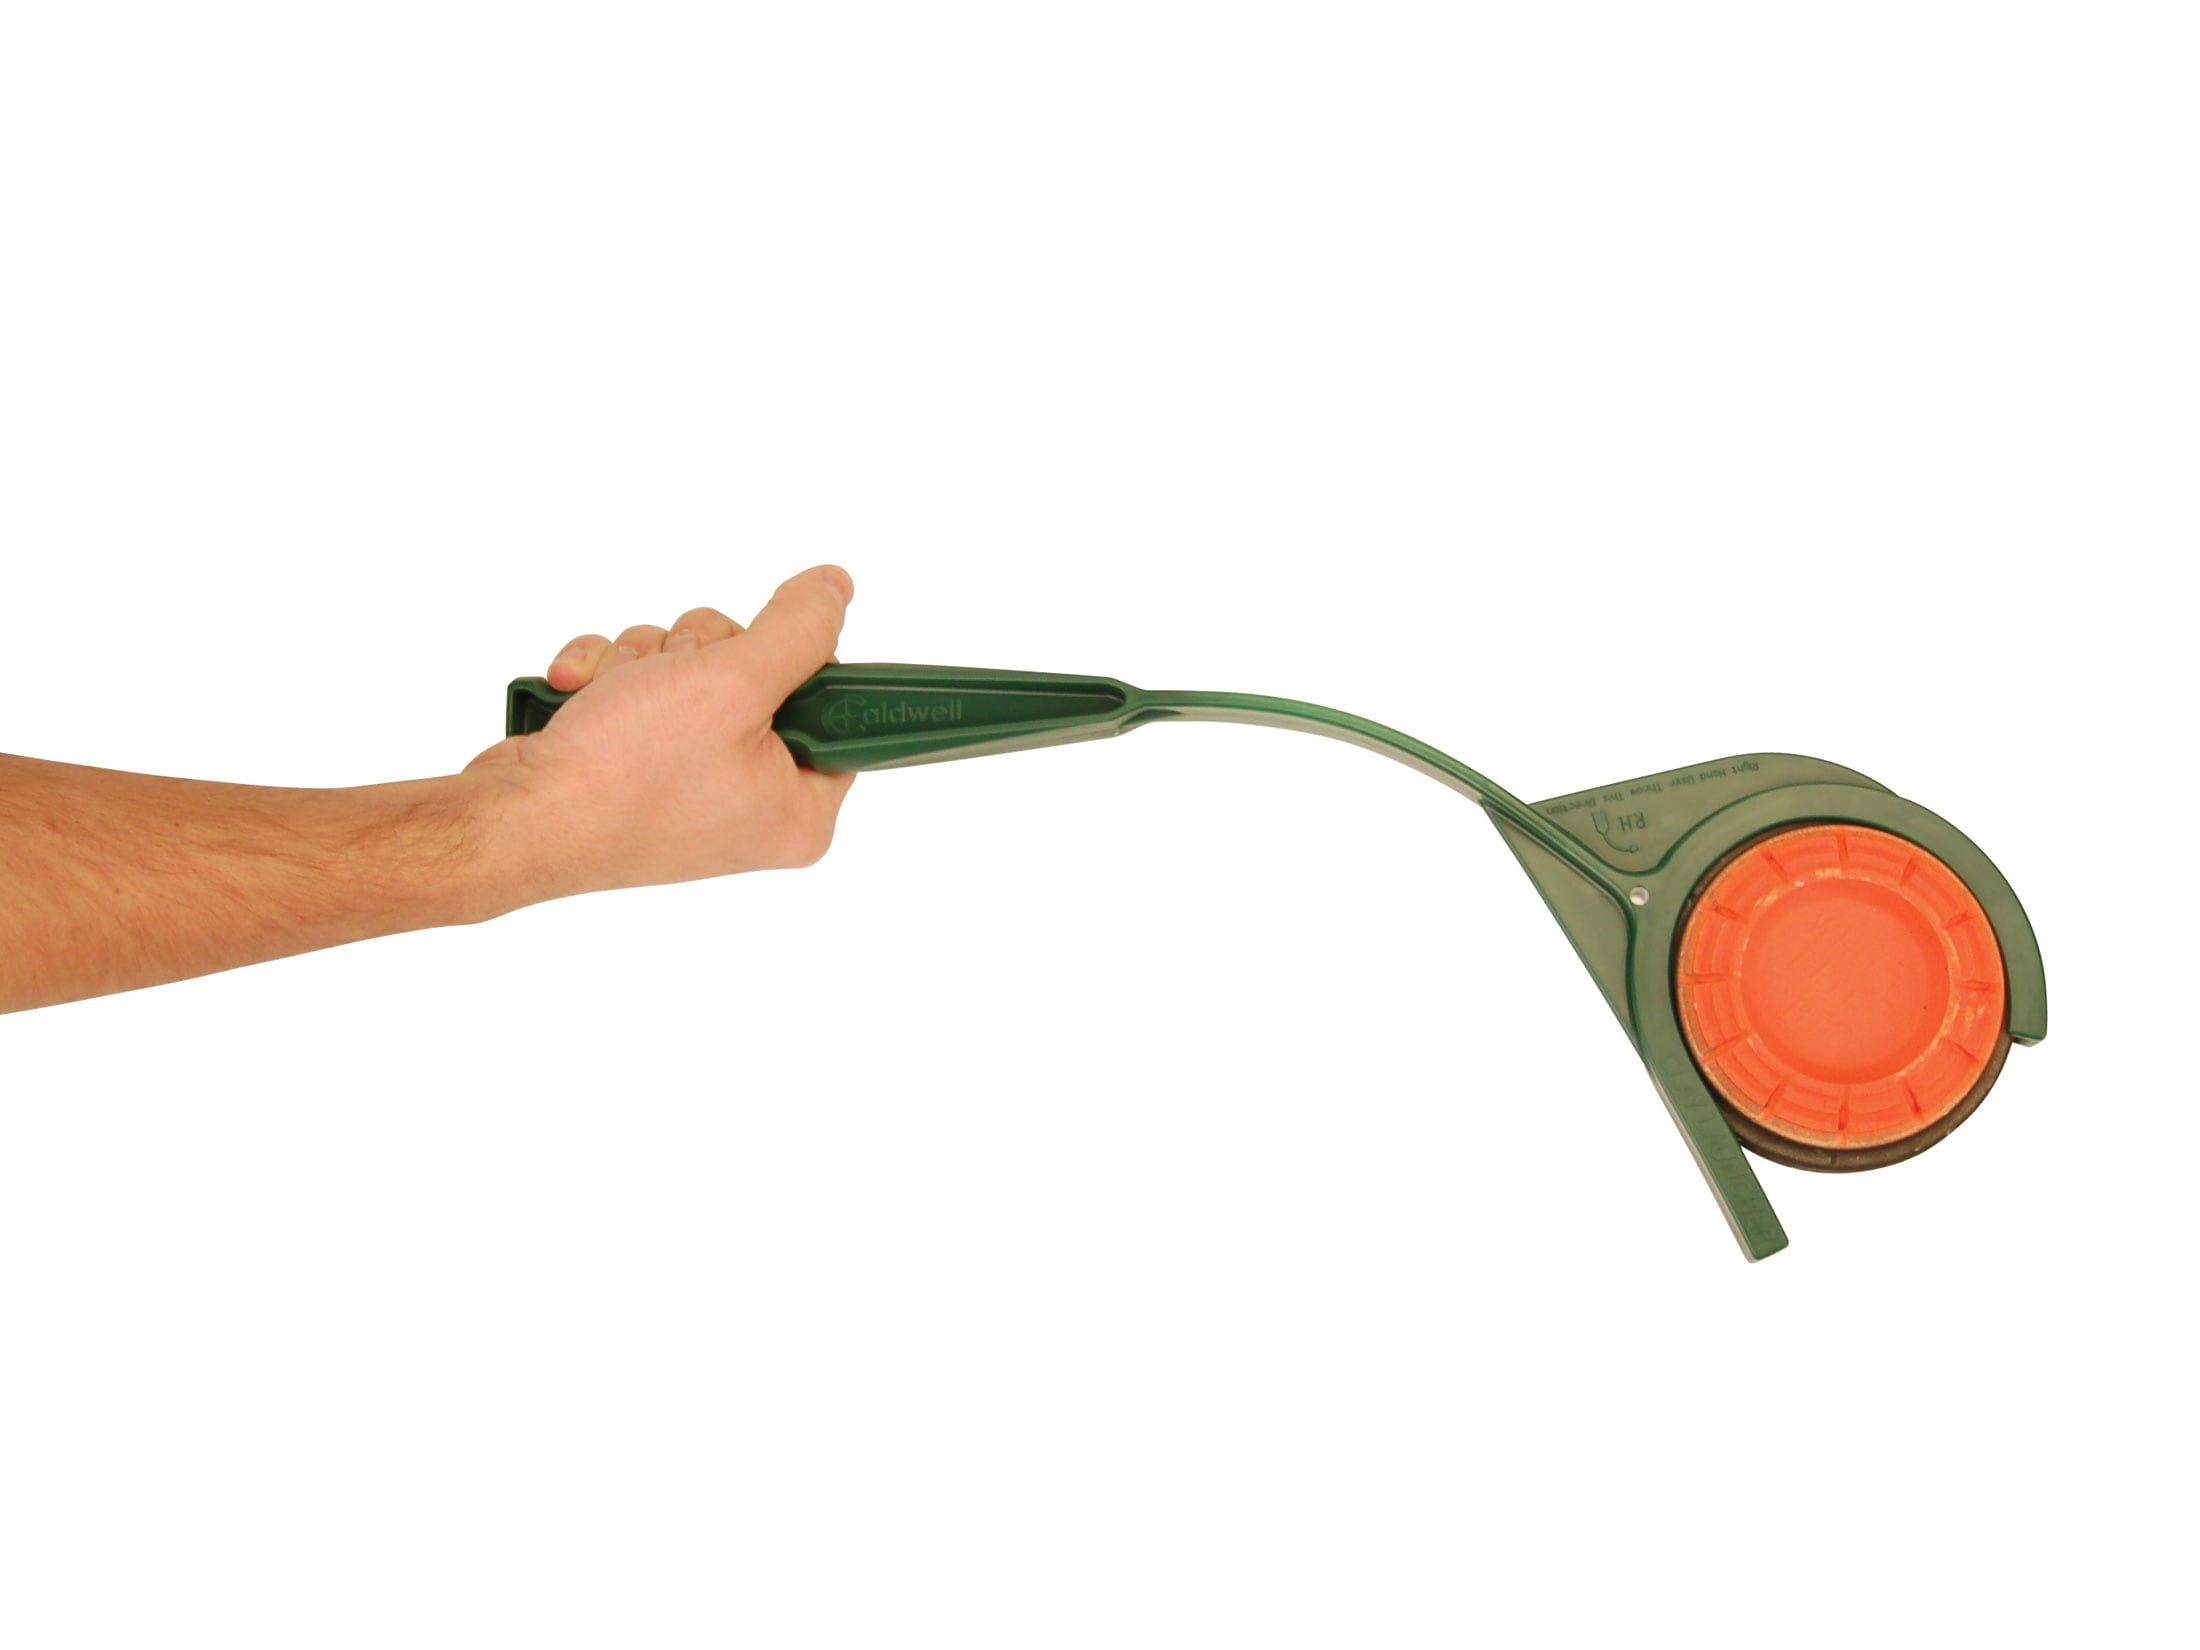 Caldwell Hand Held Clay Target Thrower Polymer Green For Sale